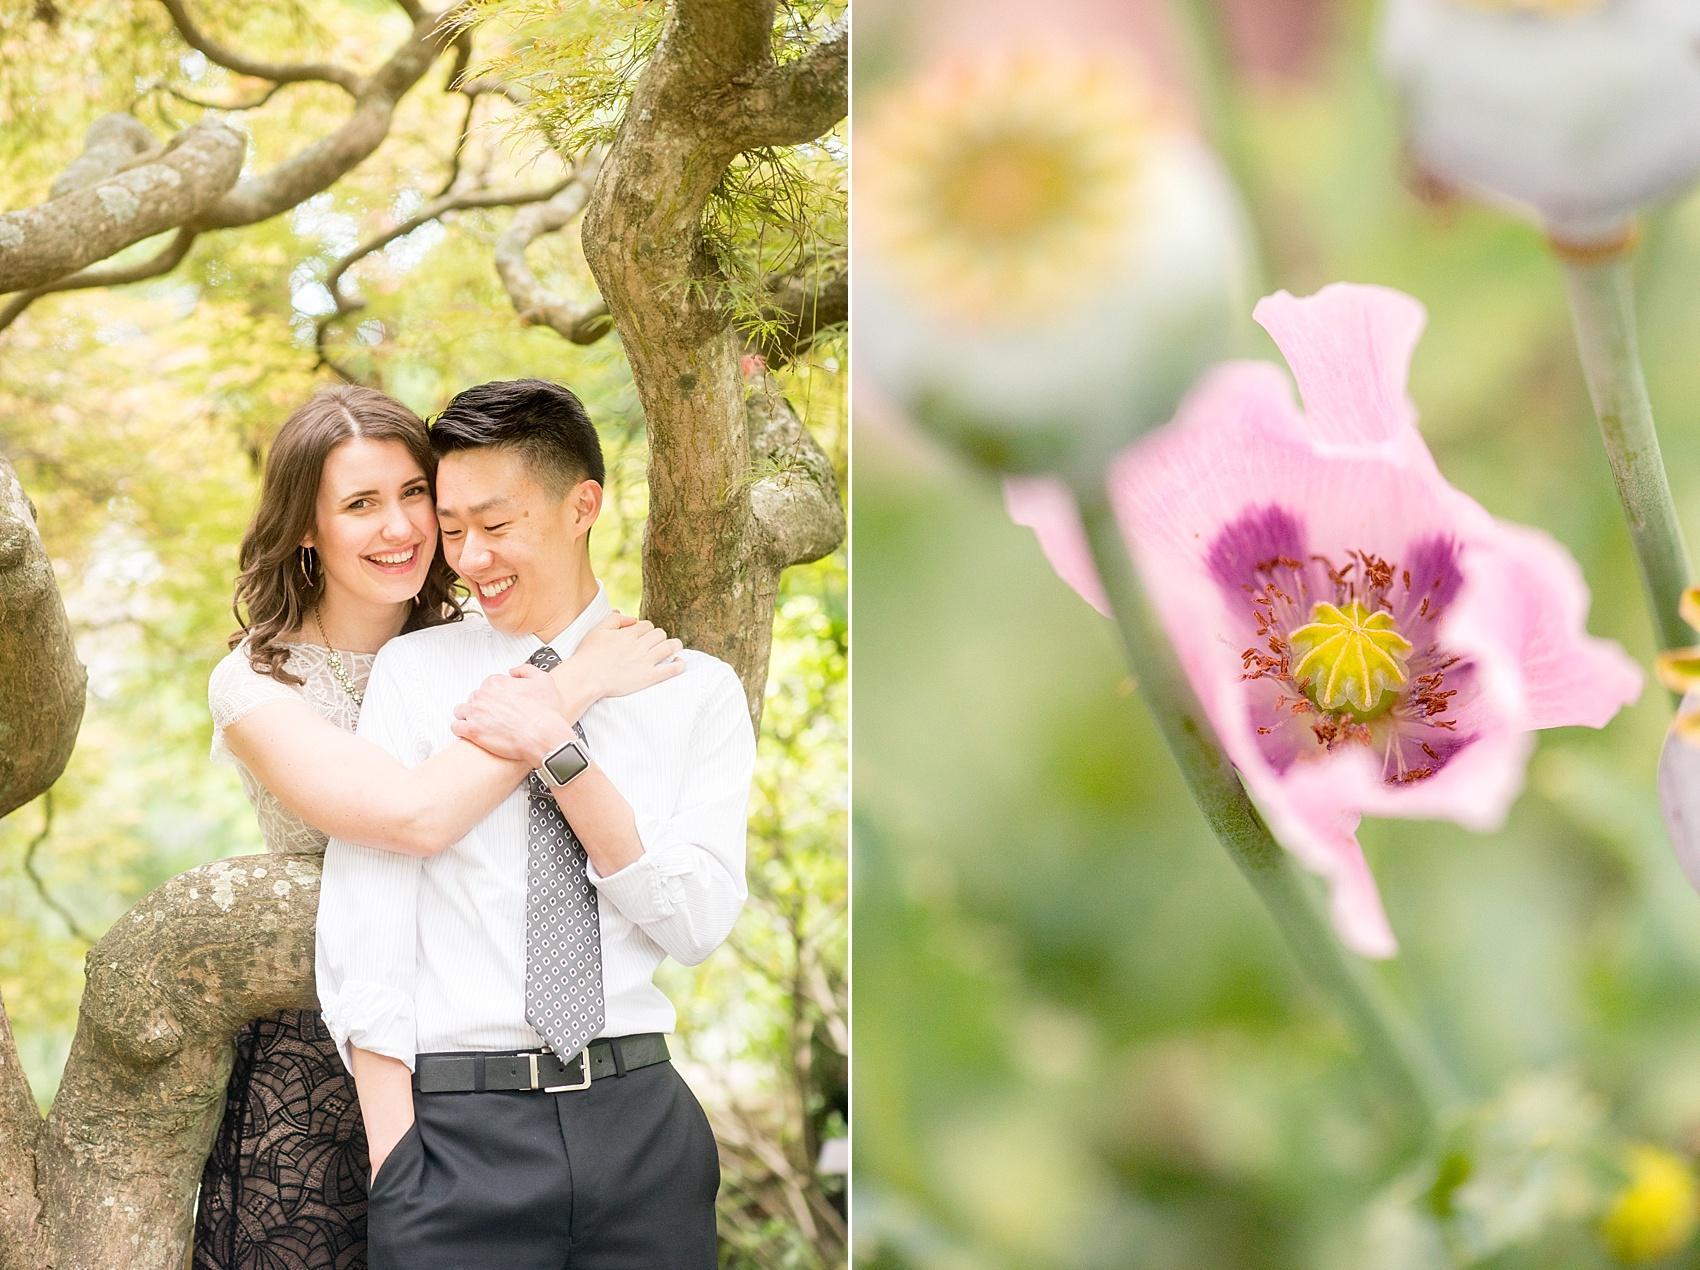 Raleigh North Carolina wedding photographer, Mikkel Paige Photography, photographs a romantic outdoor engagement session at Raulston Arboretum at NC State campus.